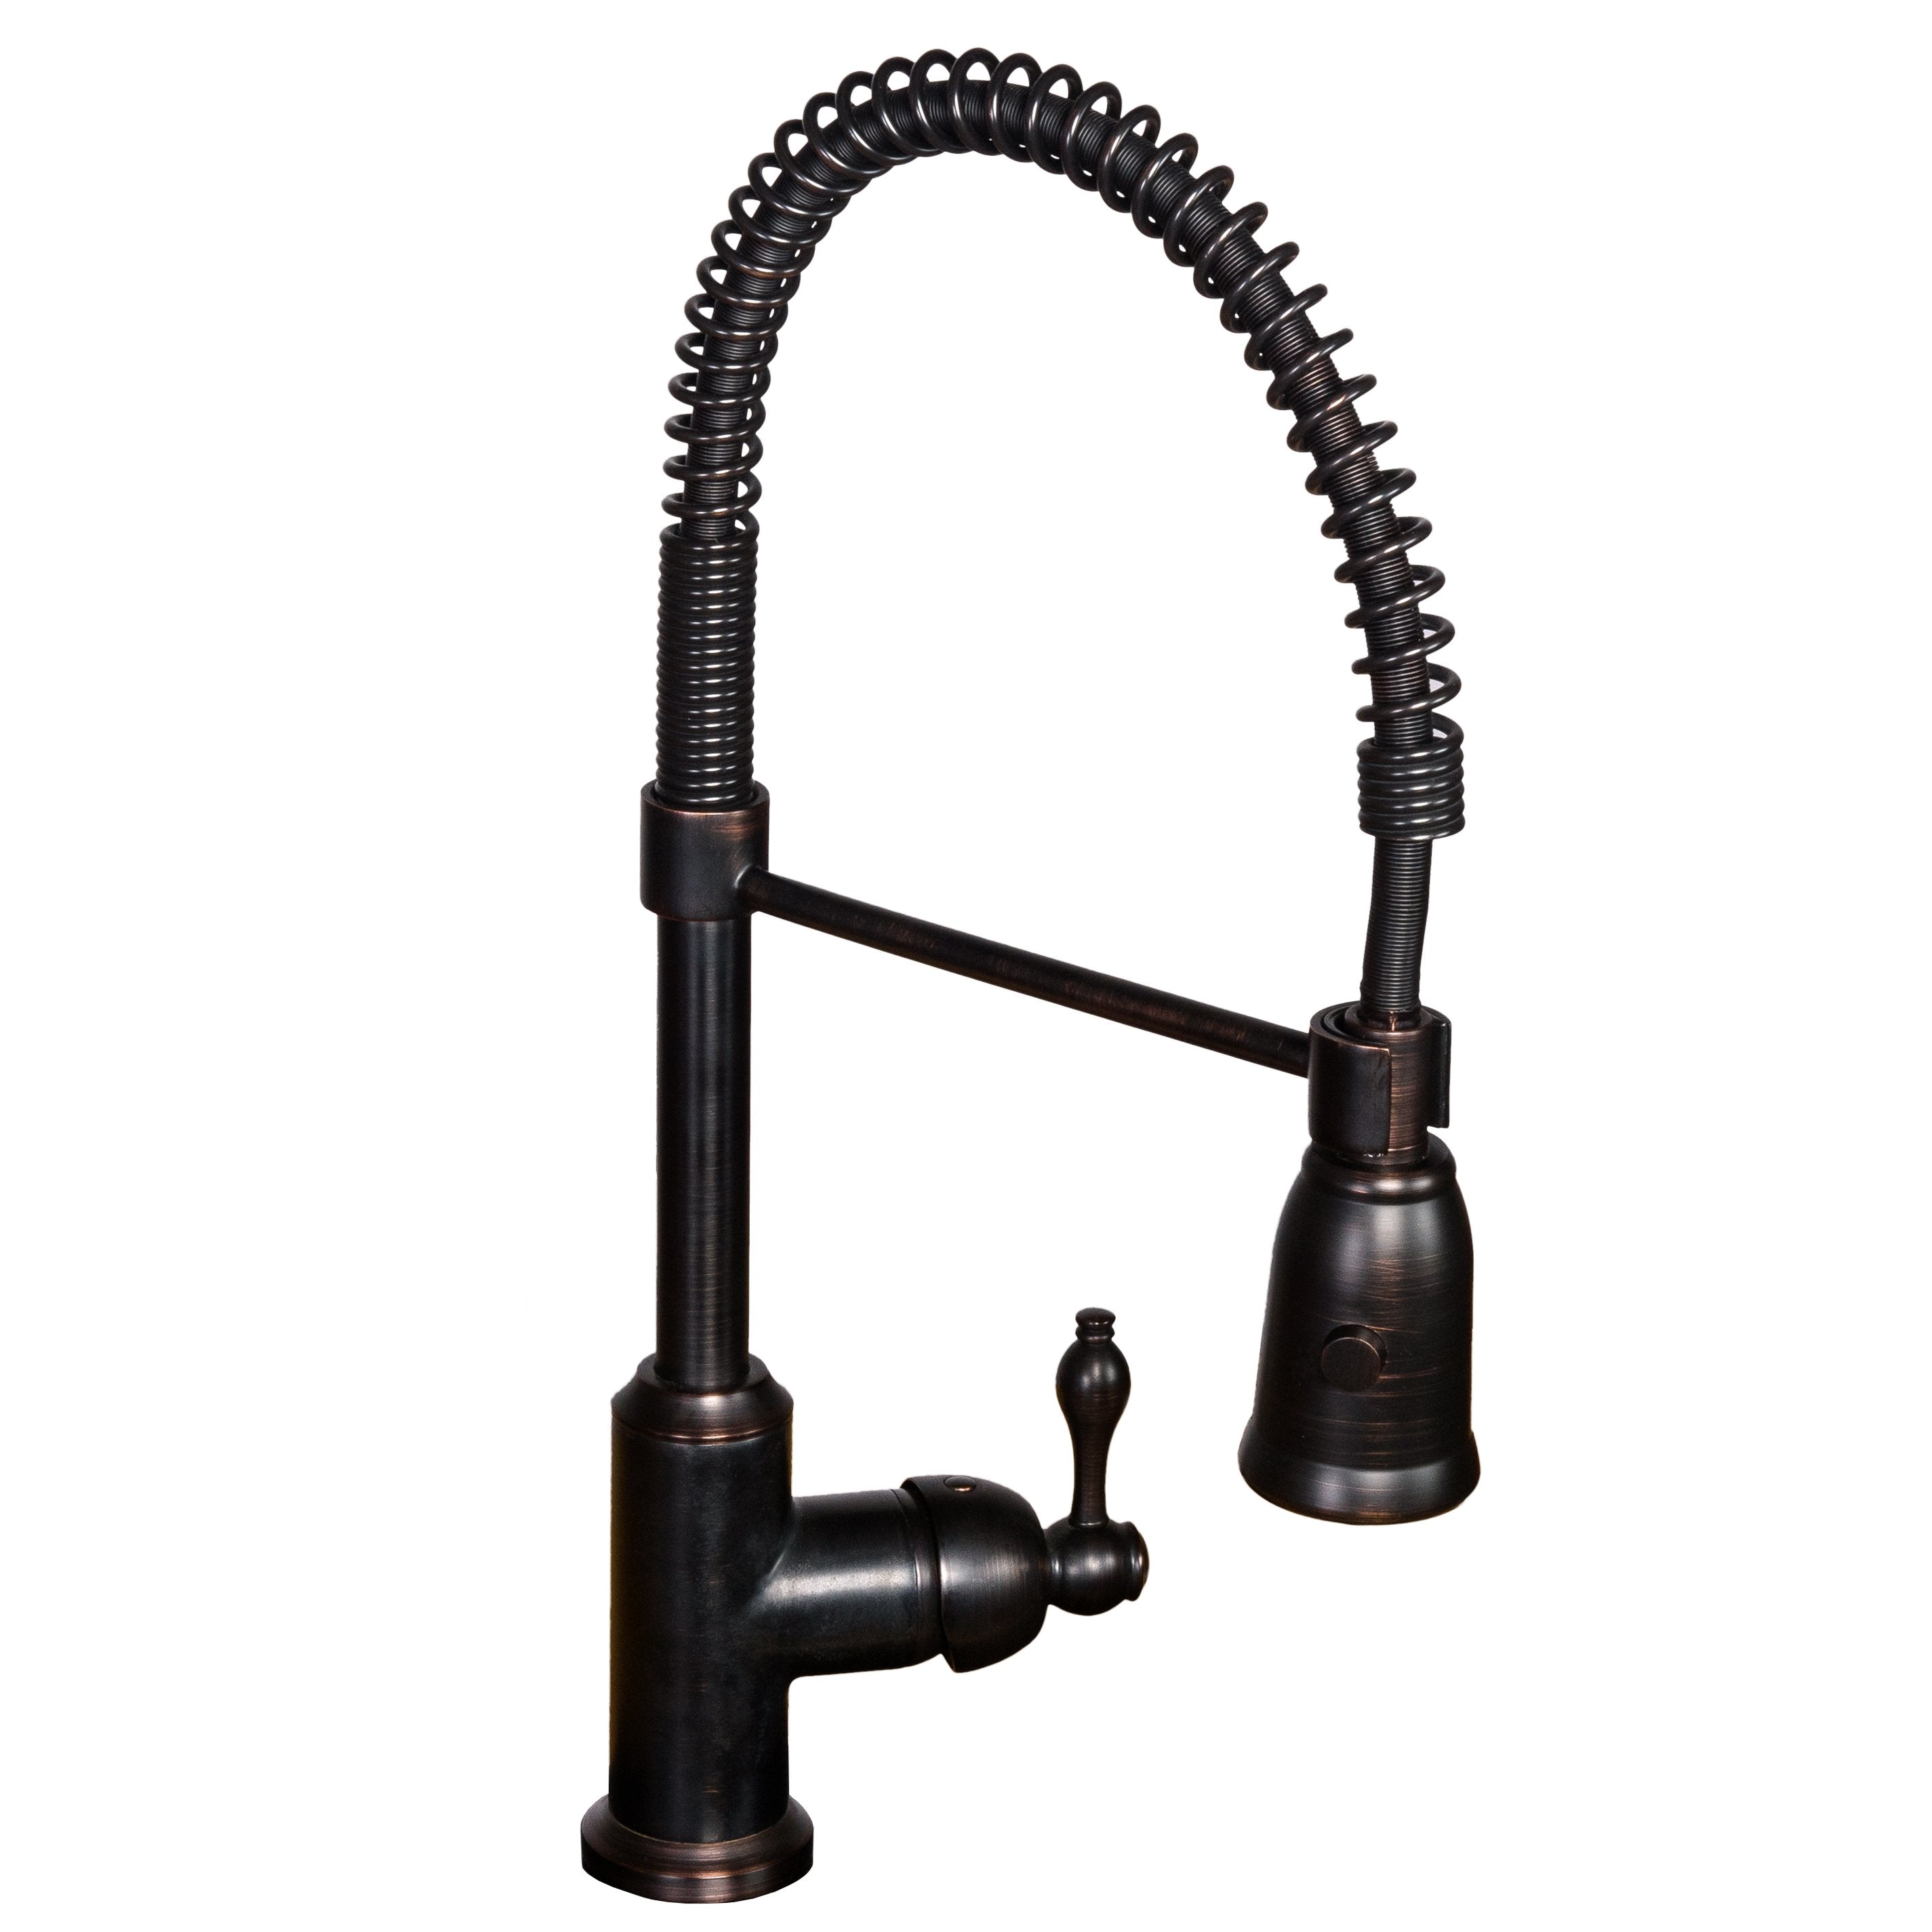 Premier Copper Products - KSP4_K70DB33199-SD5 Kitchen Sink, Faucet and Accessories Package-DirectSinks